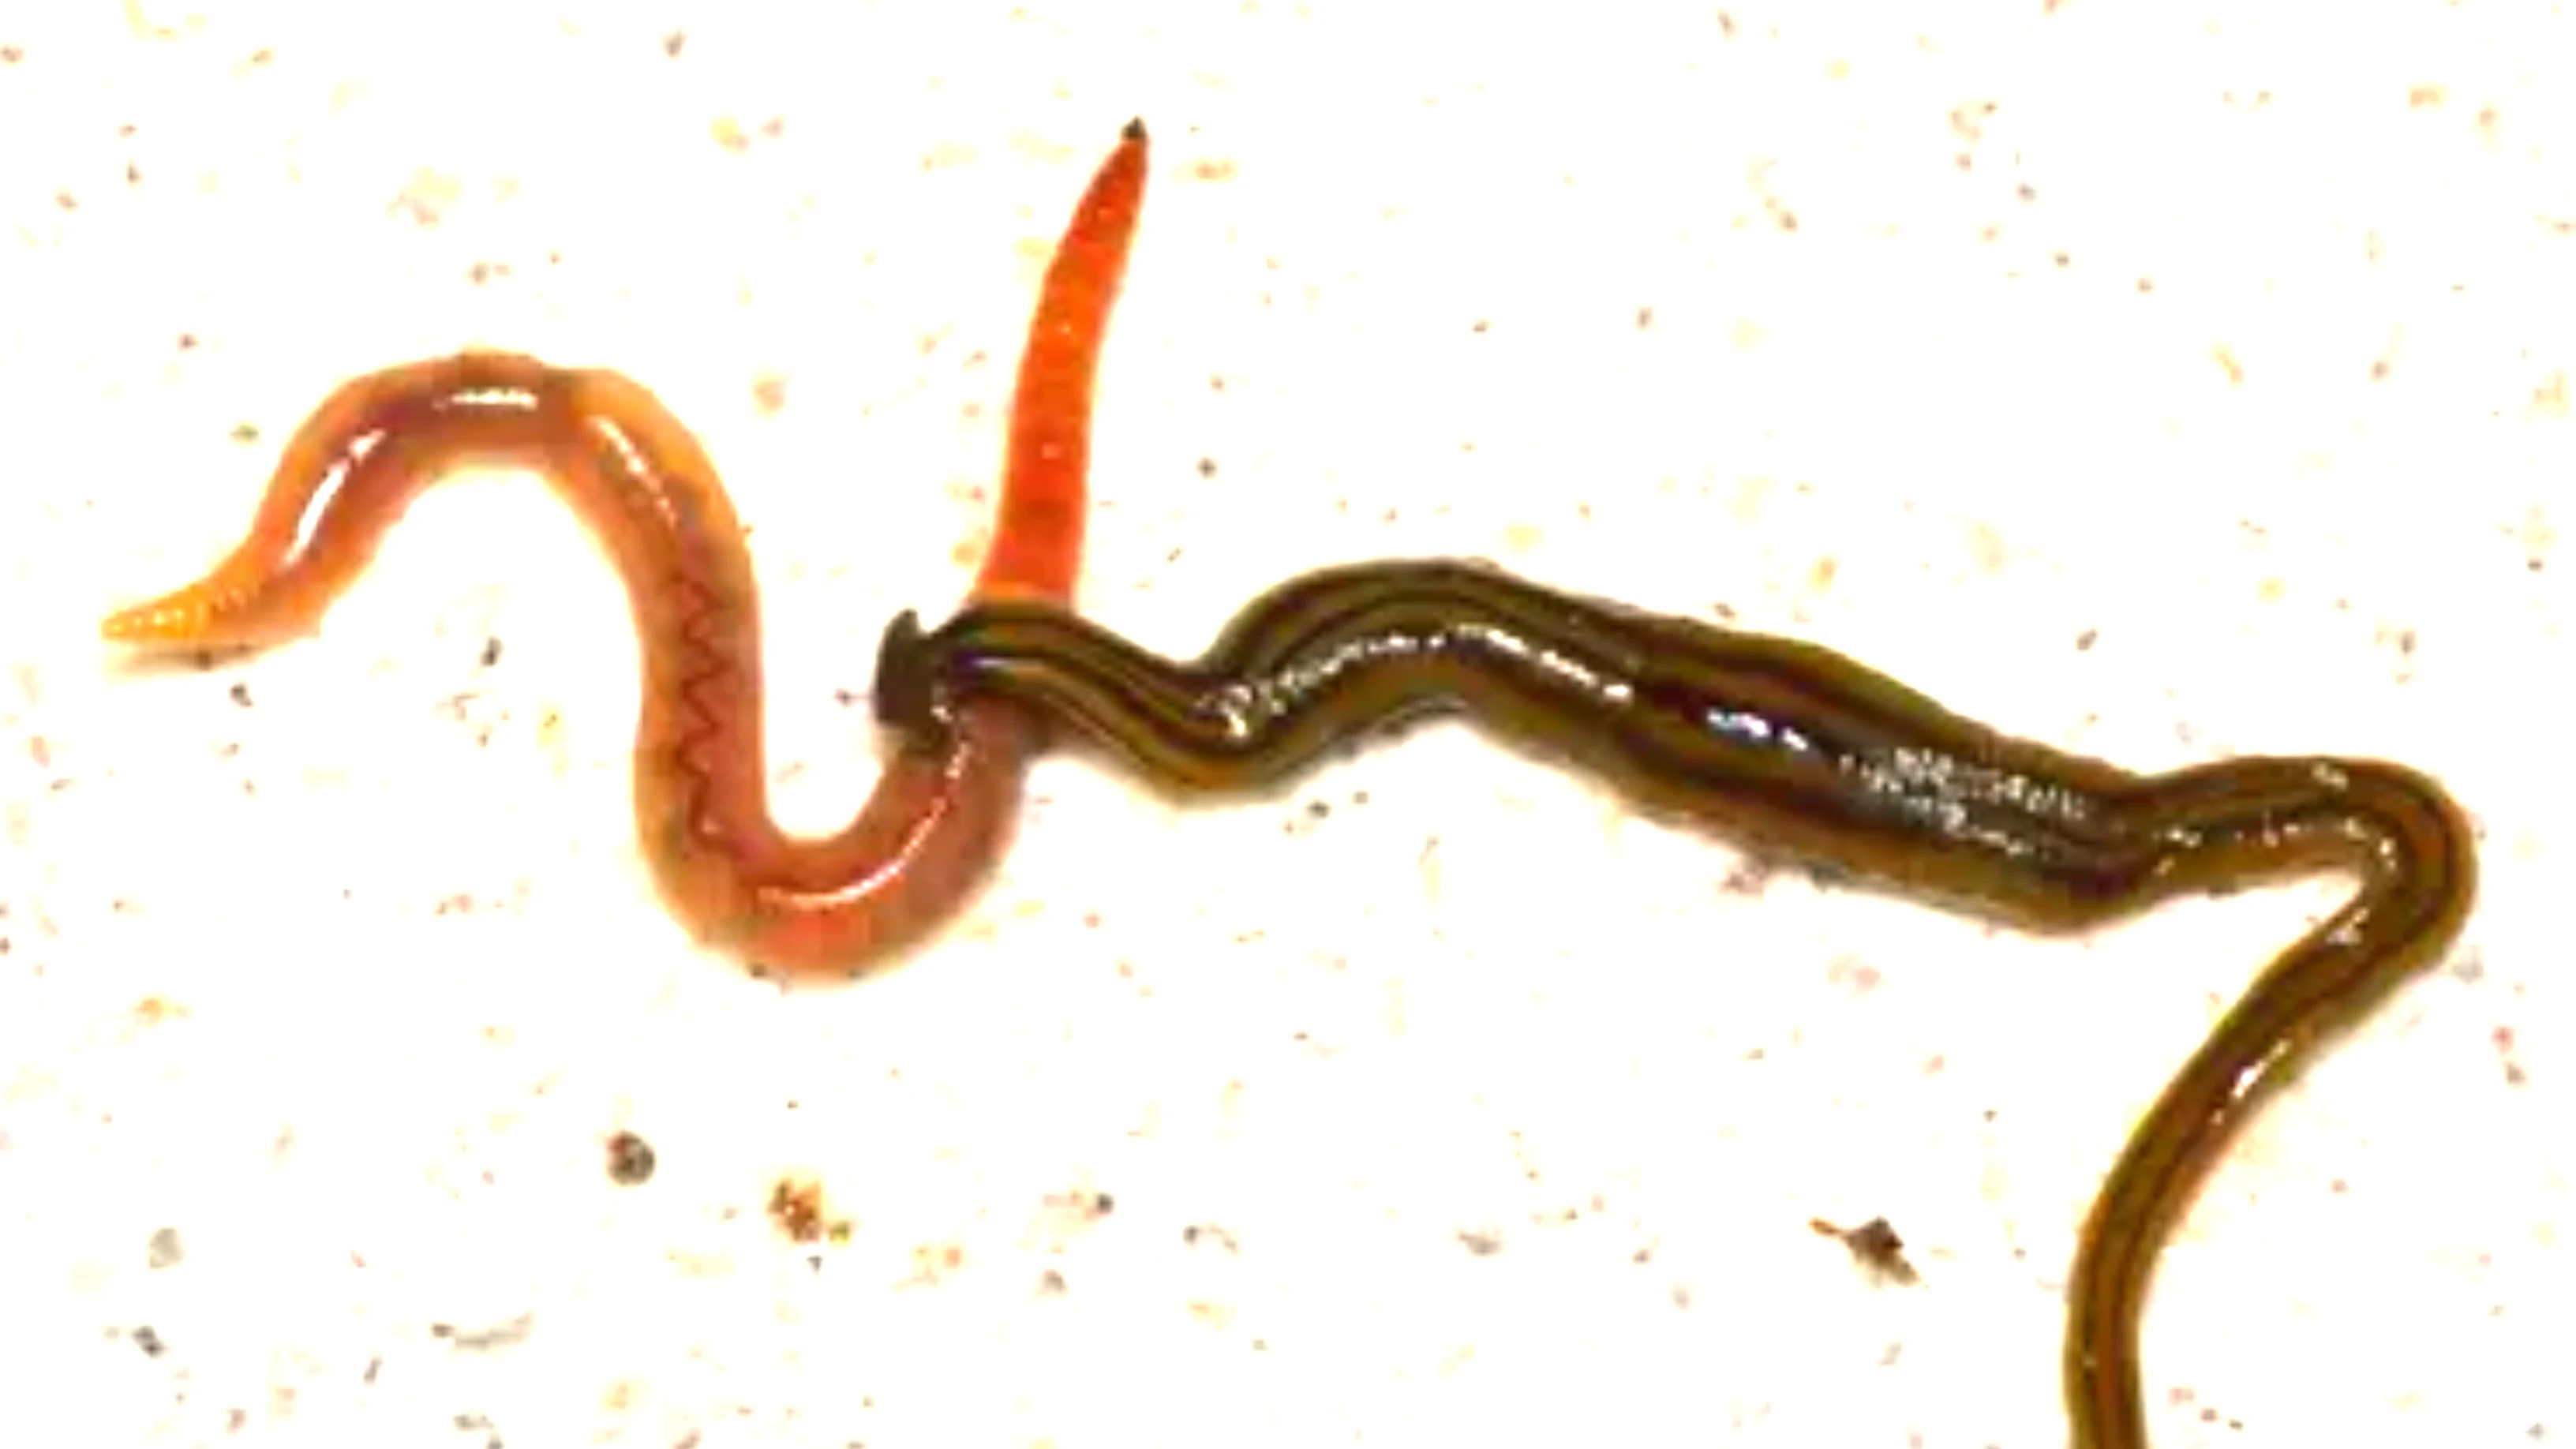 Horrifying Hammerhead Worms || Get the facts on this species of giant, carnivorous, poisonous worm